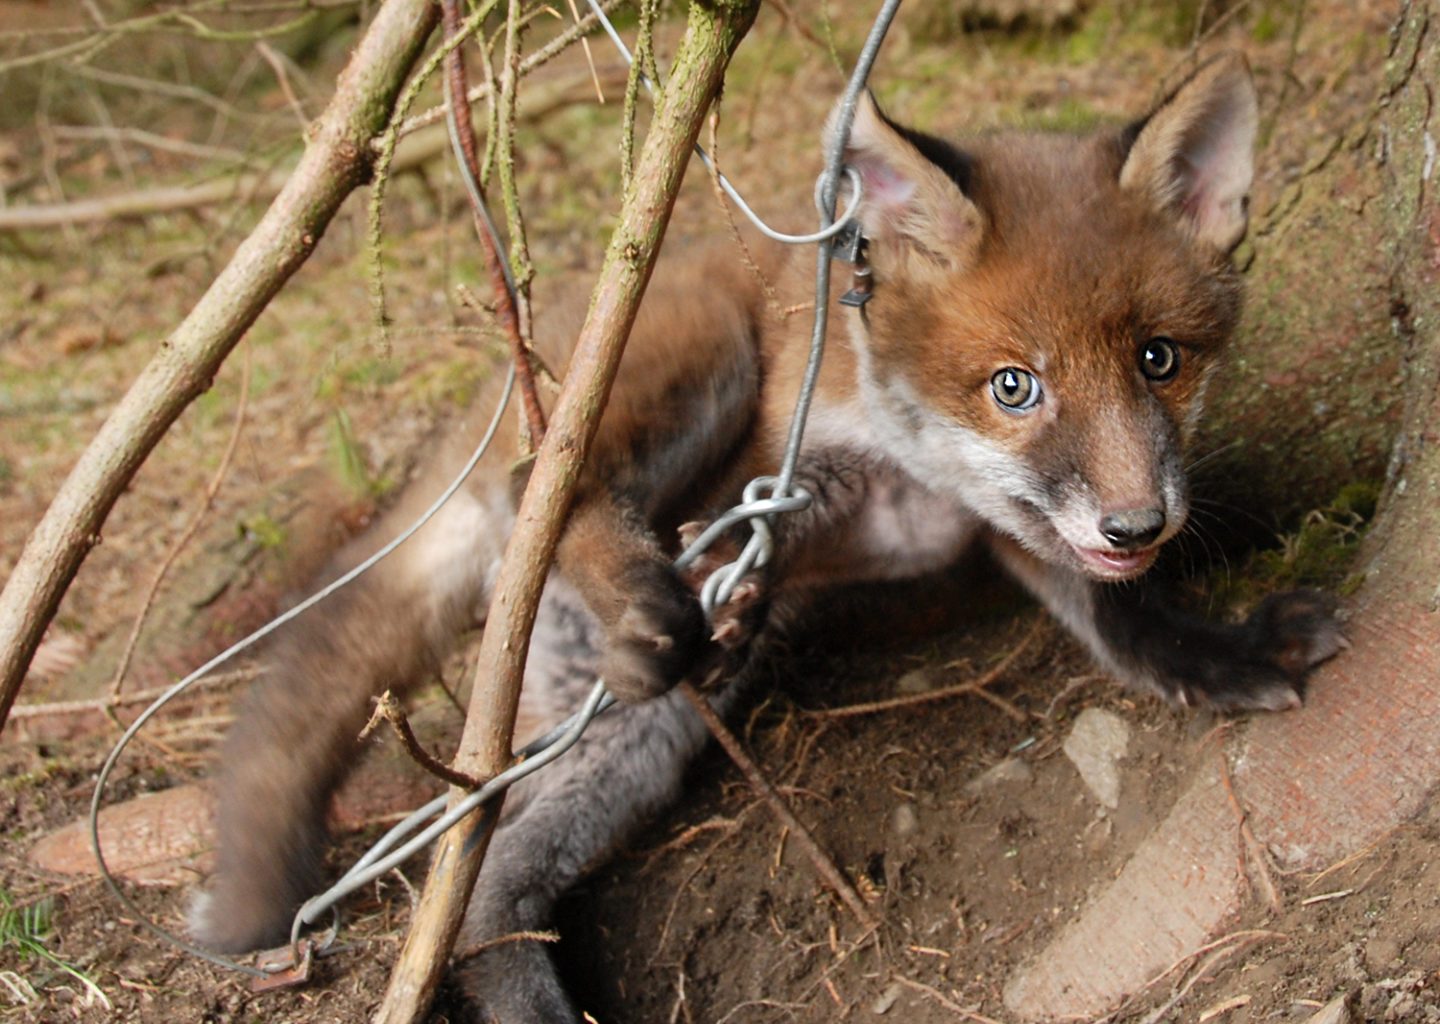 Snare traps killing and injuring pets and protected species, claims report